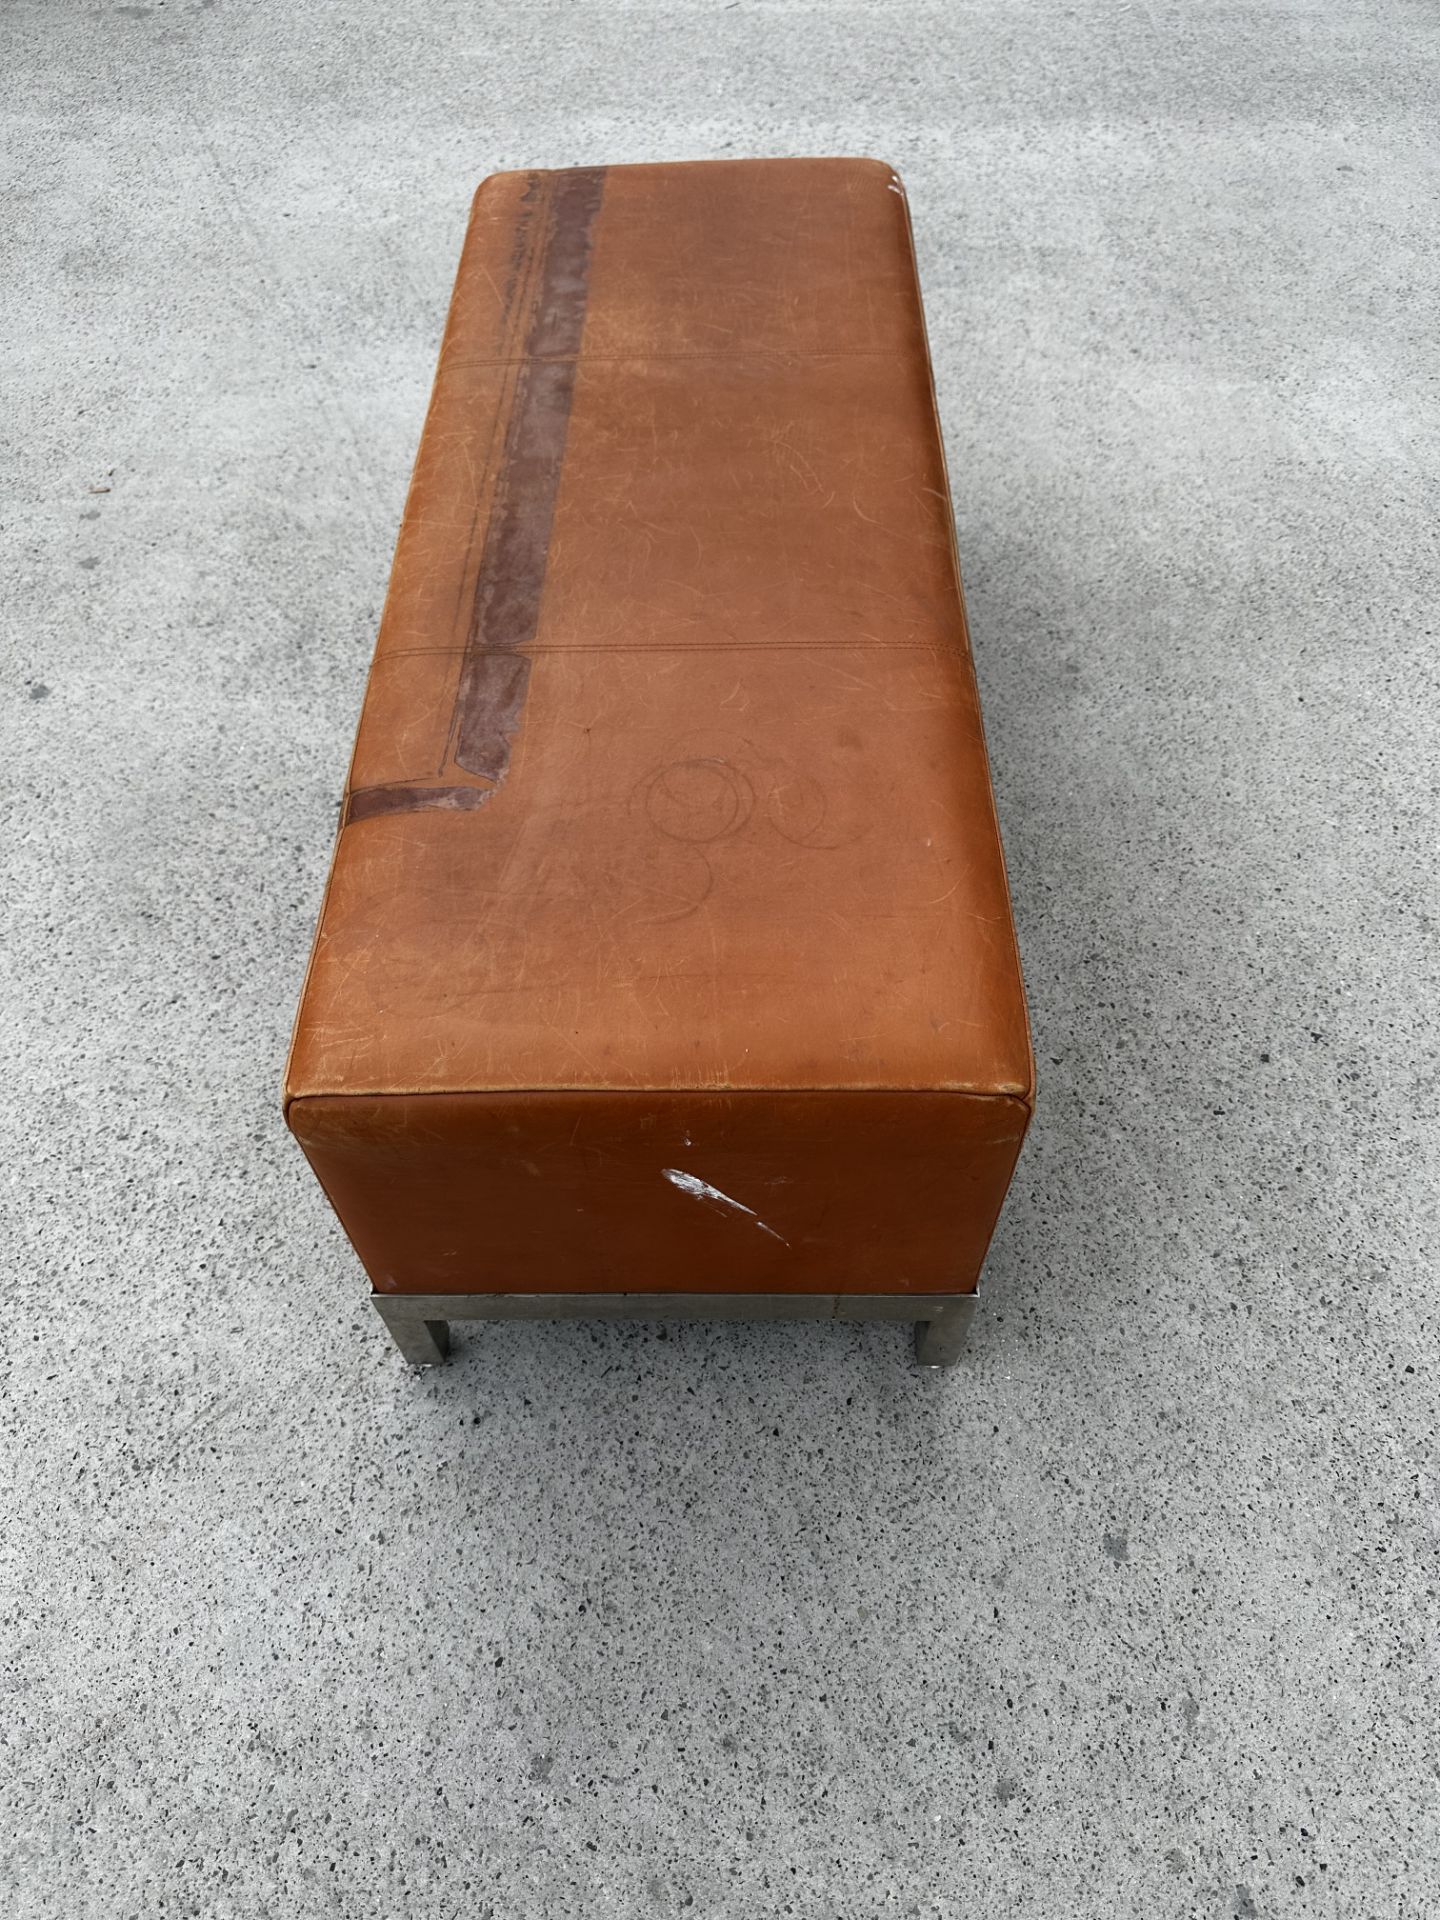 Vintage Look Leather Foot Stool 113*44*44cm Sourced From Luxury House Clearance - Image 3 of 3